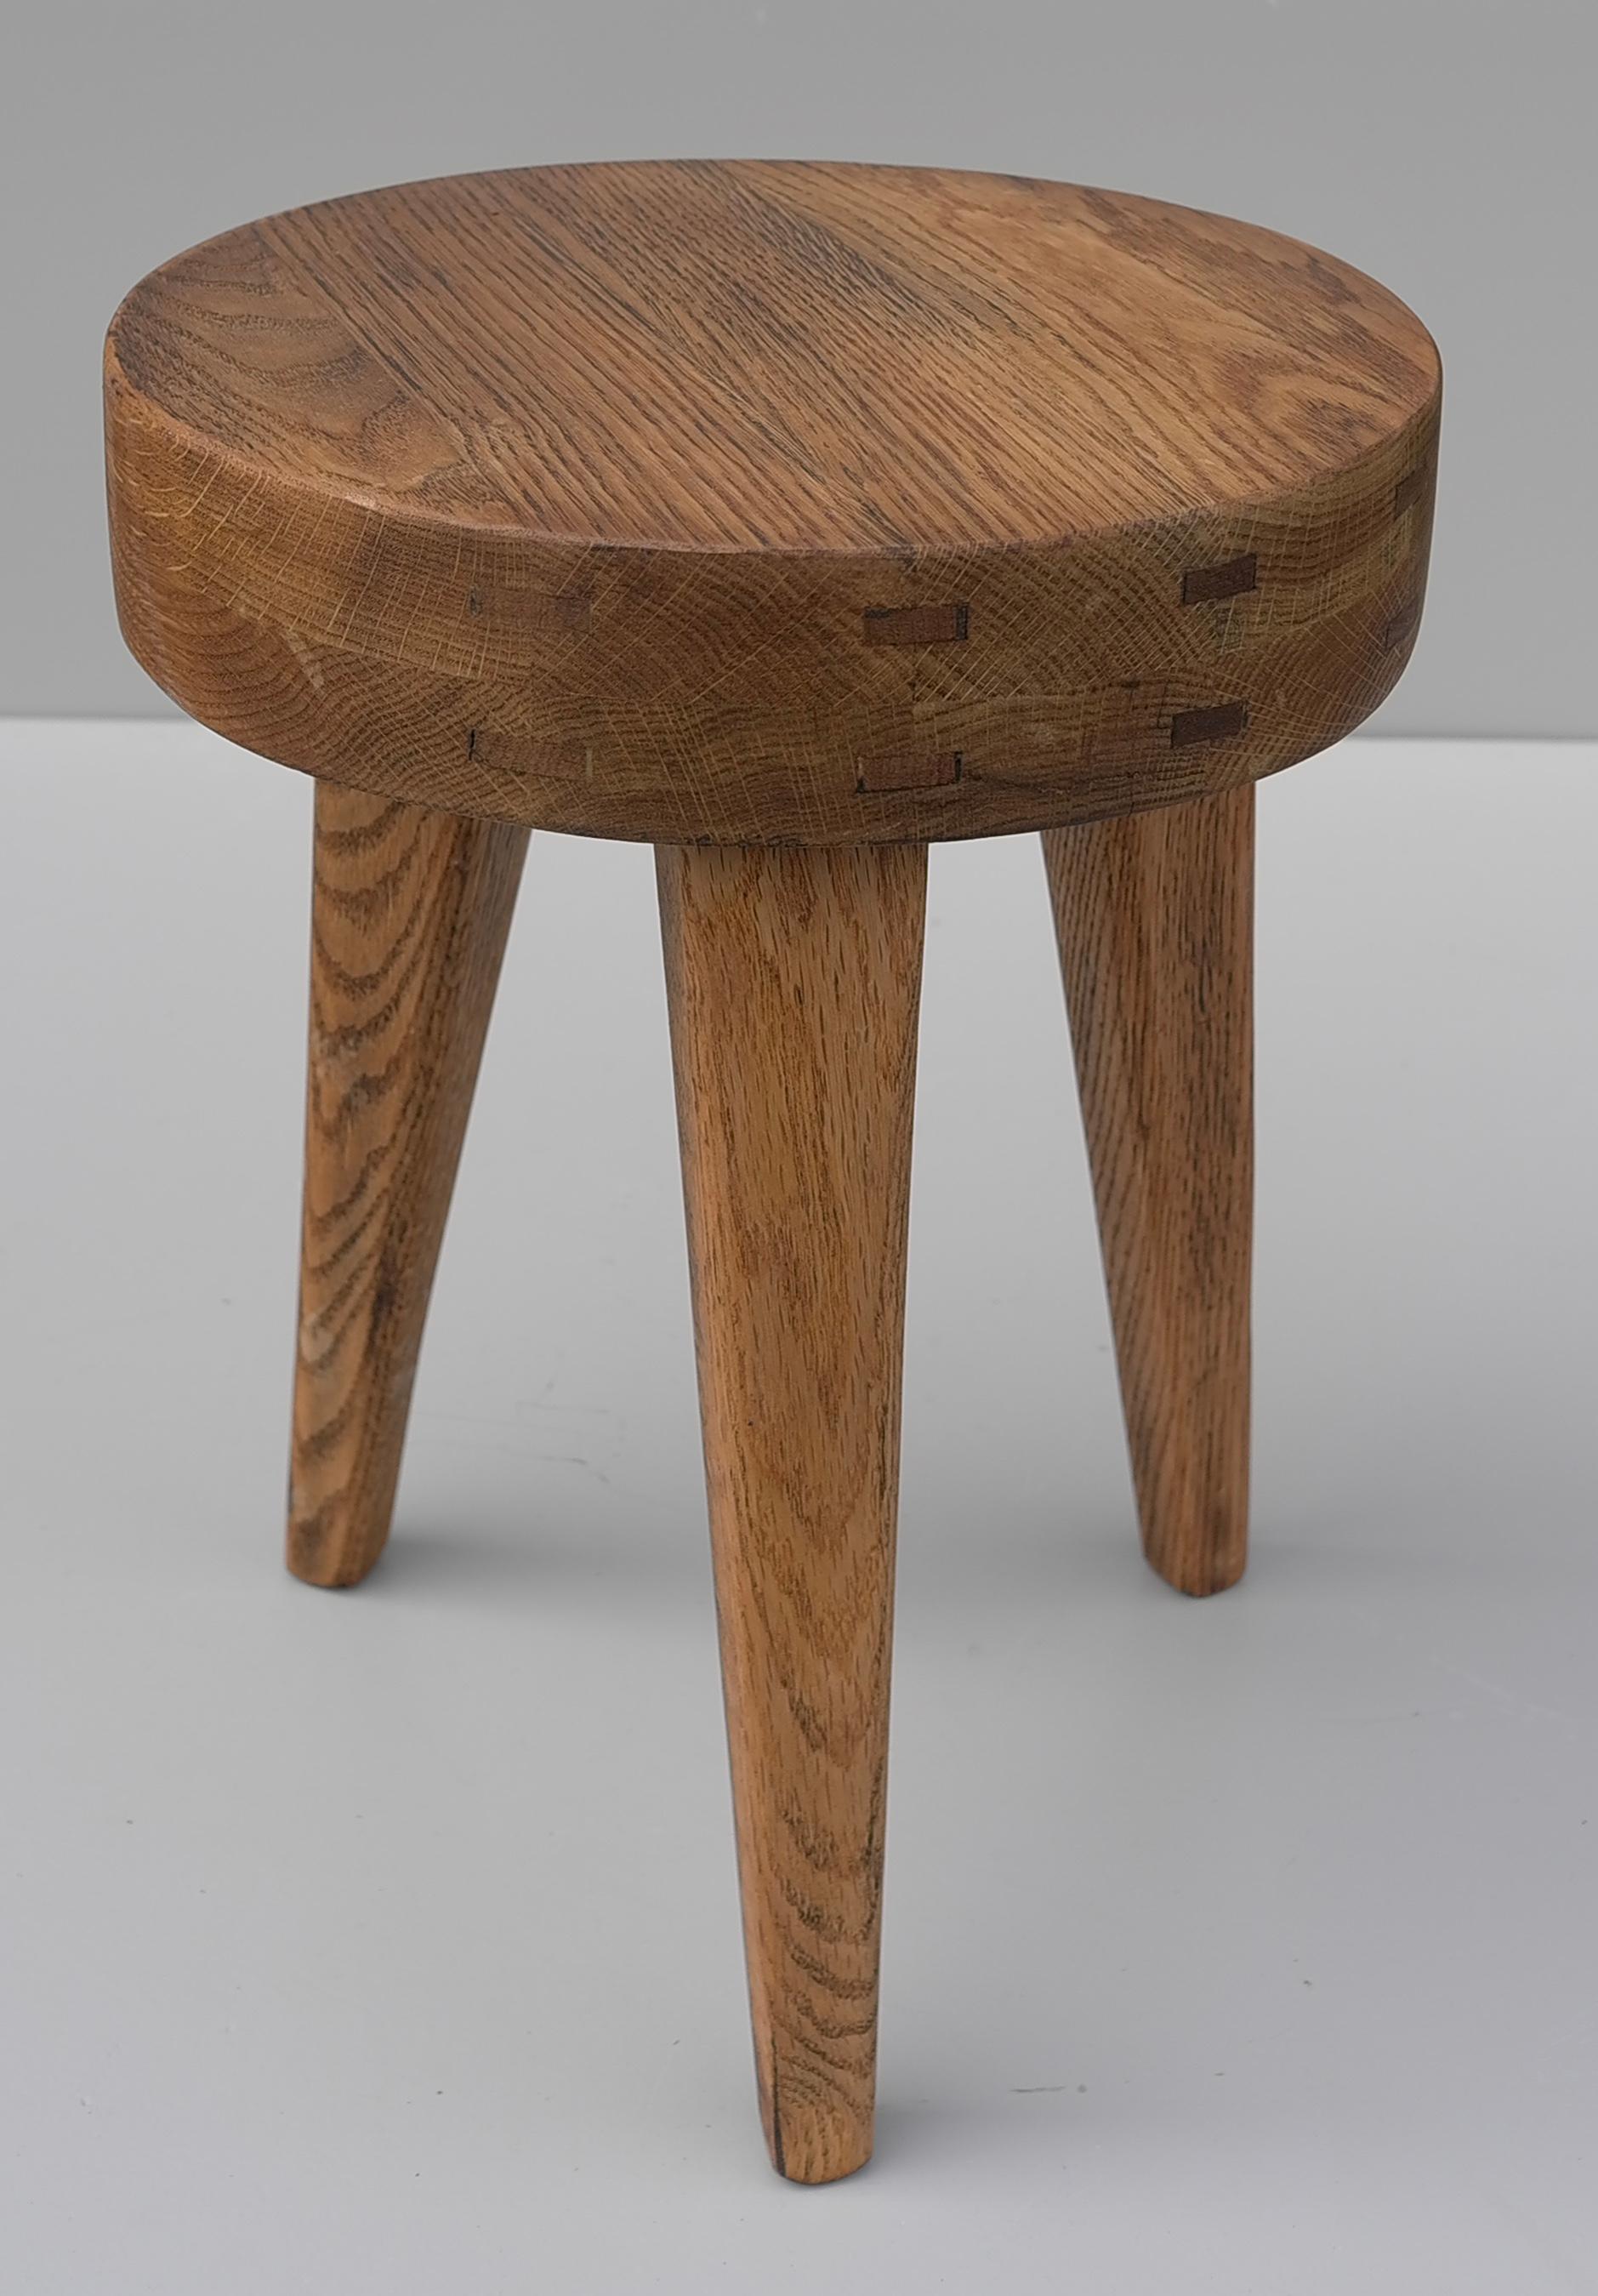 French Solid Oak Mid-Century Modern Craftsman Stool, France 1960's For Sale